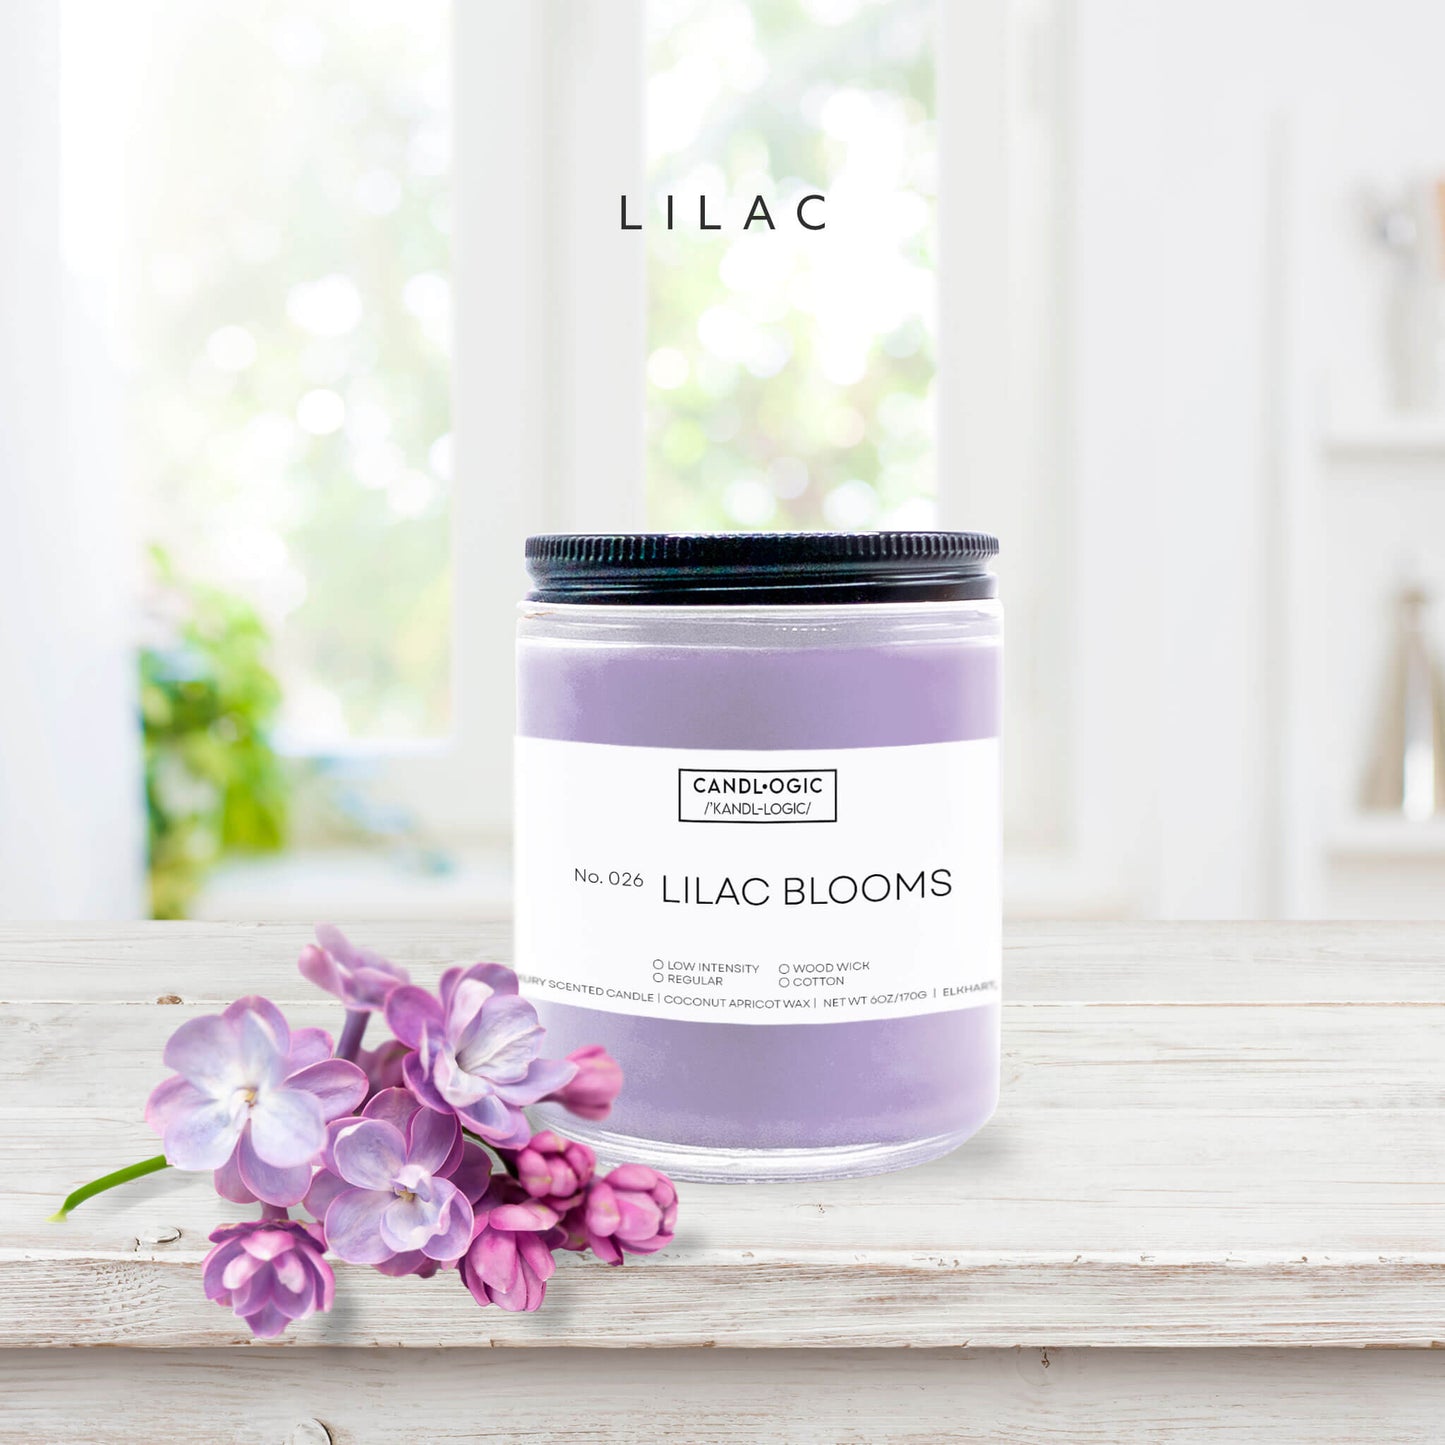 No. 026 Lilac Blooms candle - Lilac